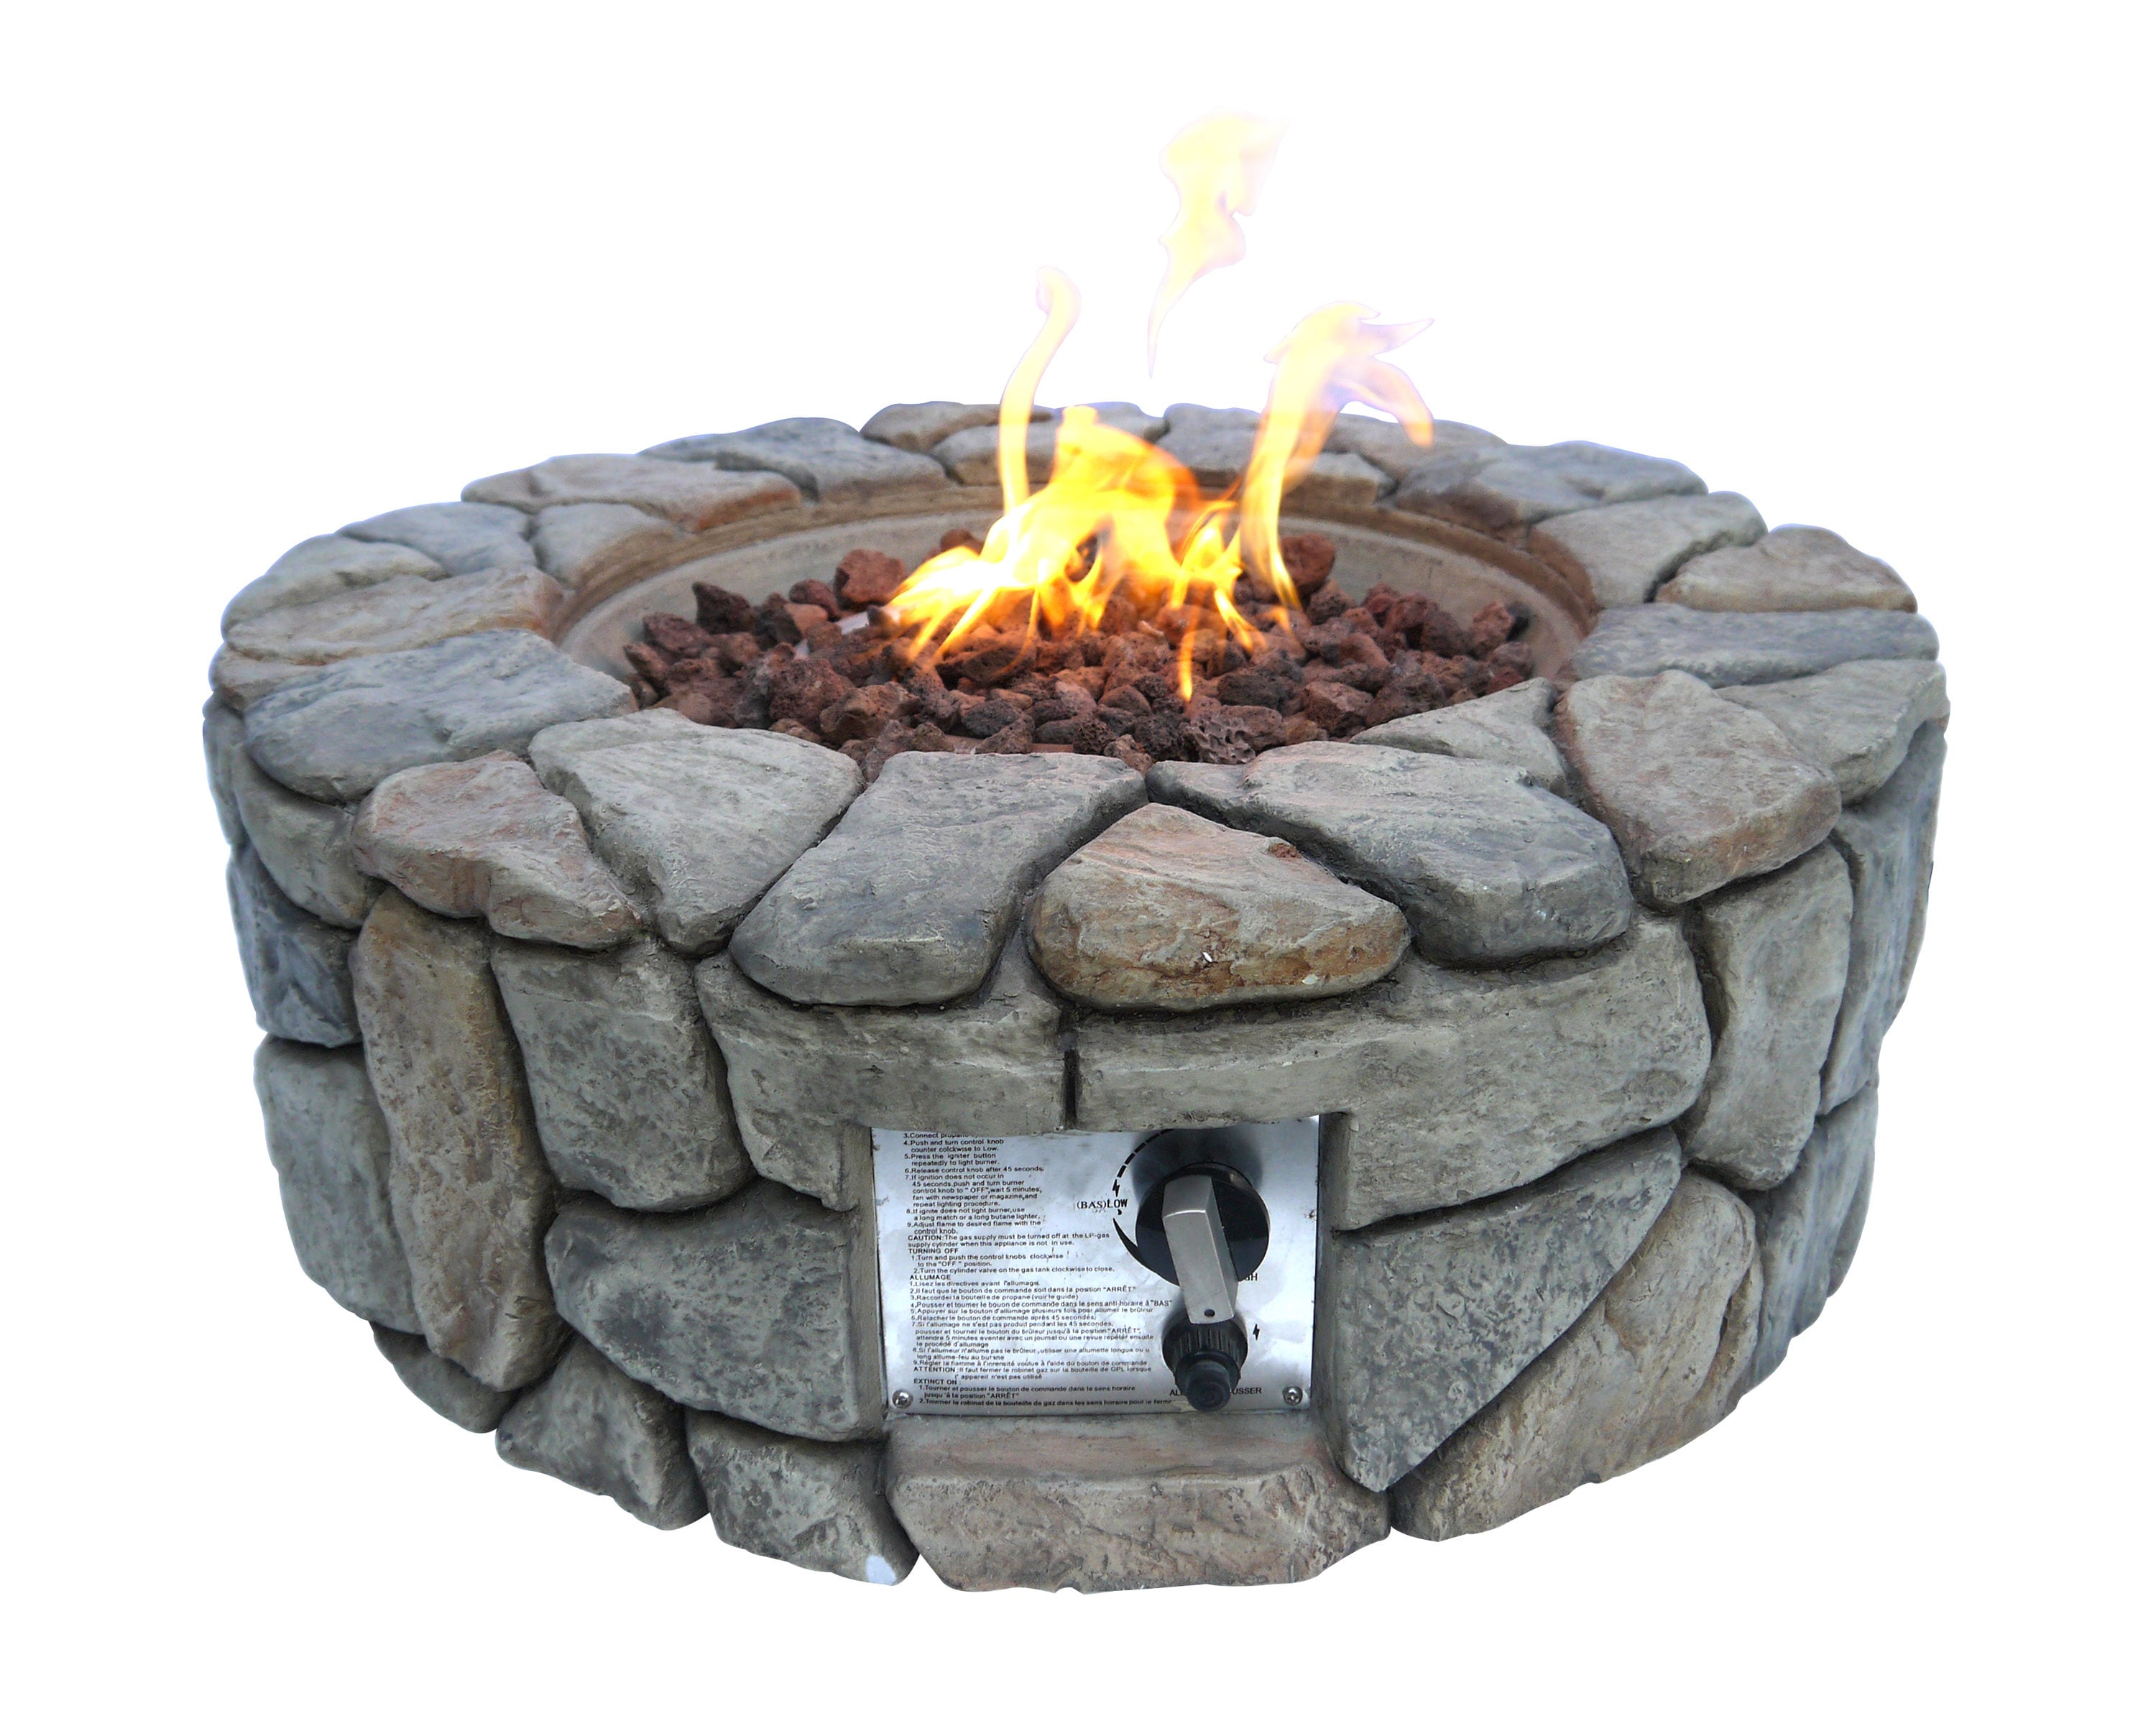 Concrete Propane Gas Fire Pit, How To Make A Fake Outdoor Fire Pit